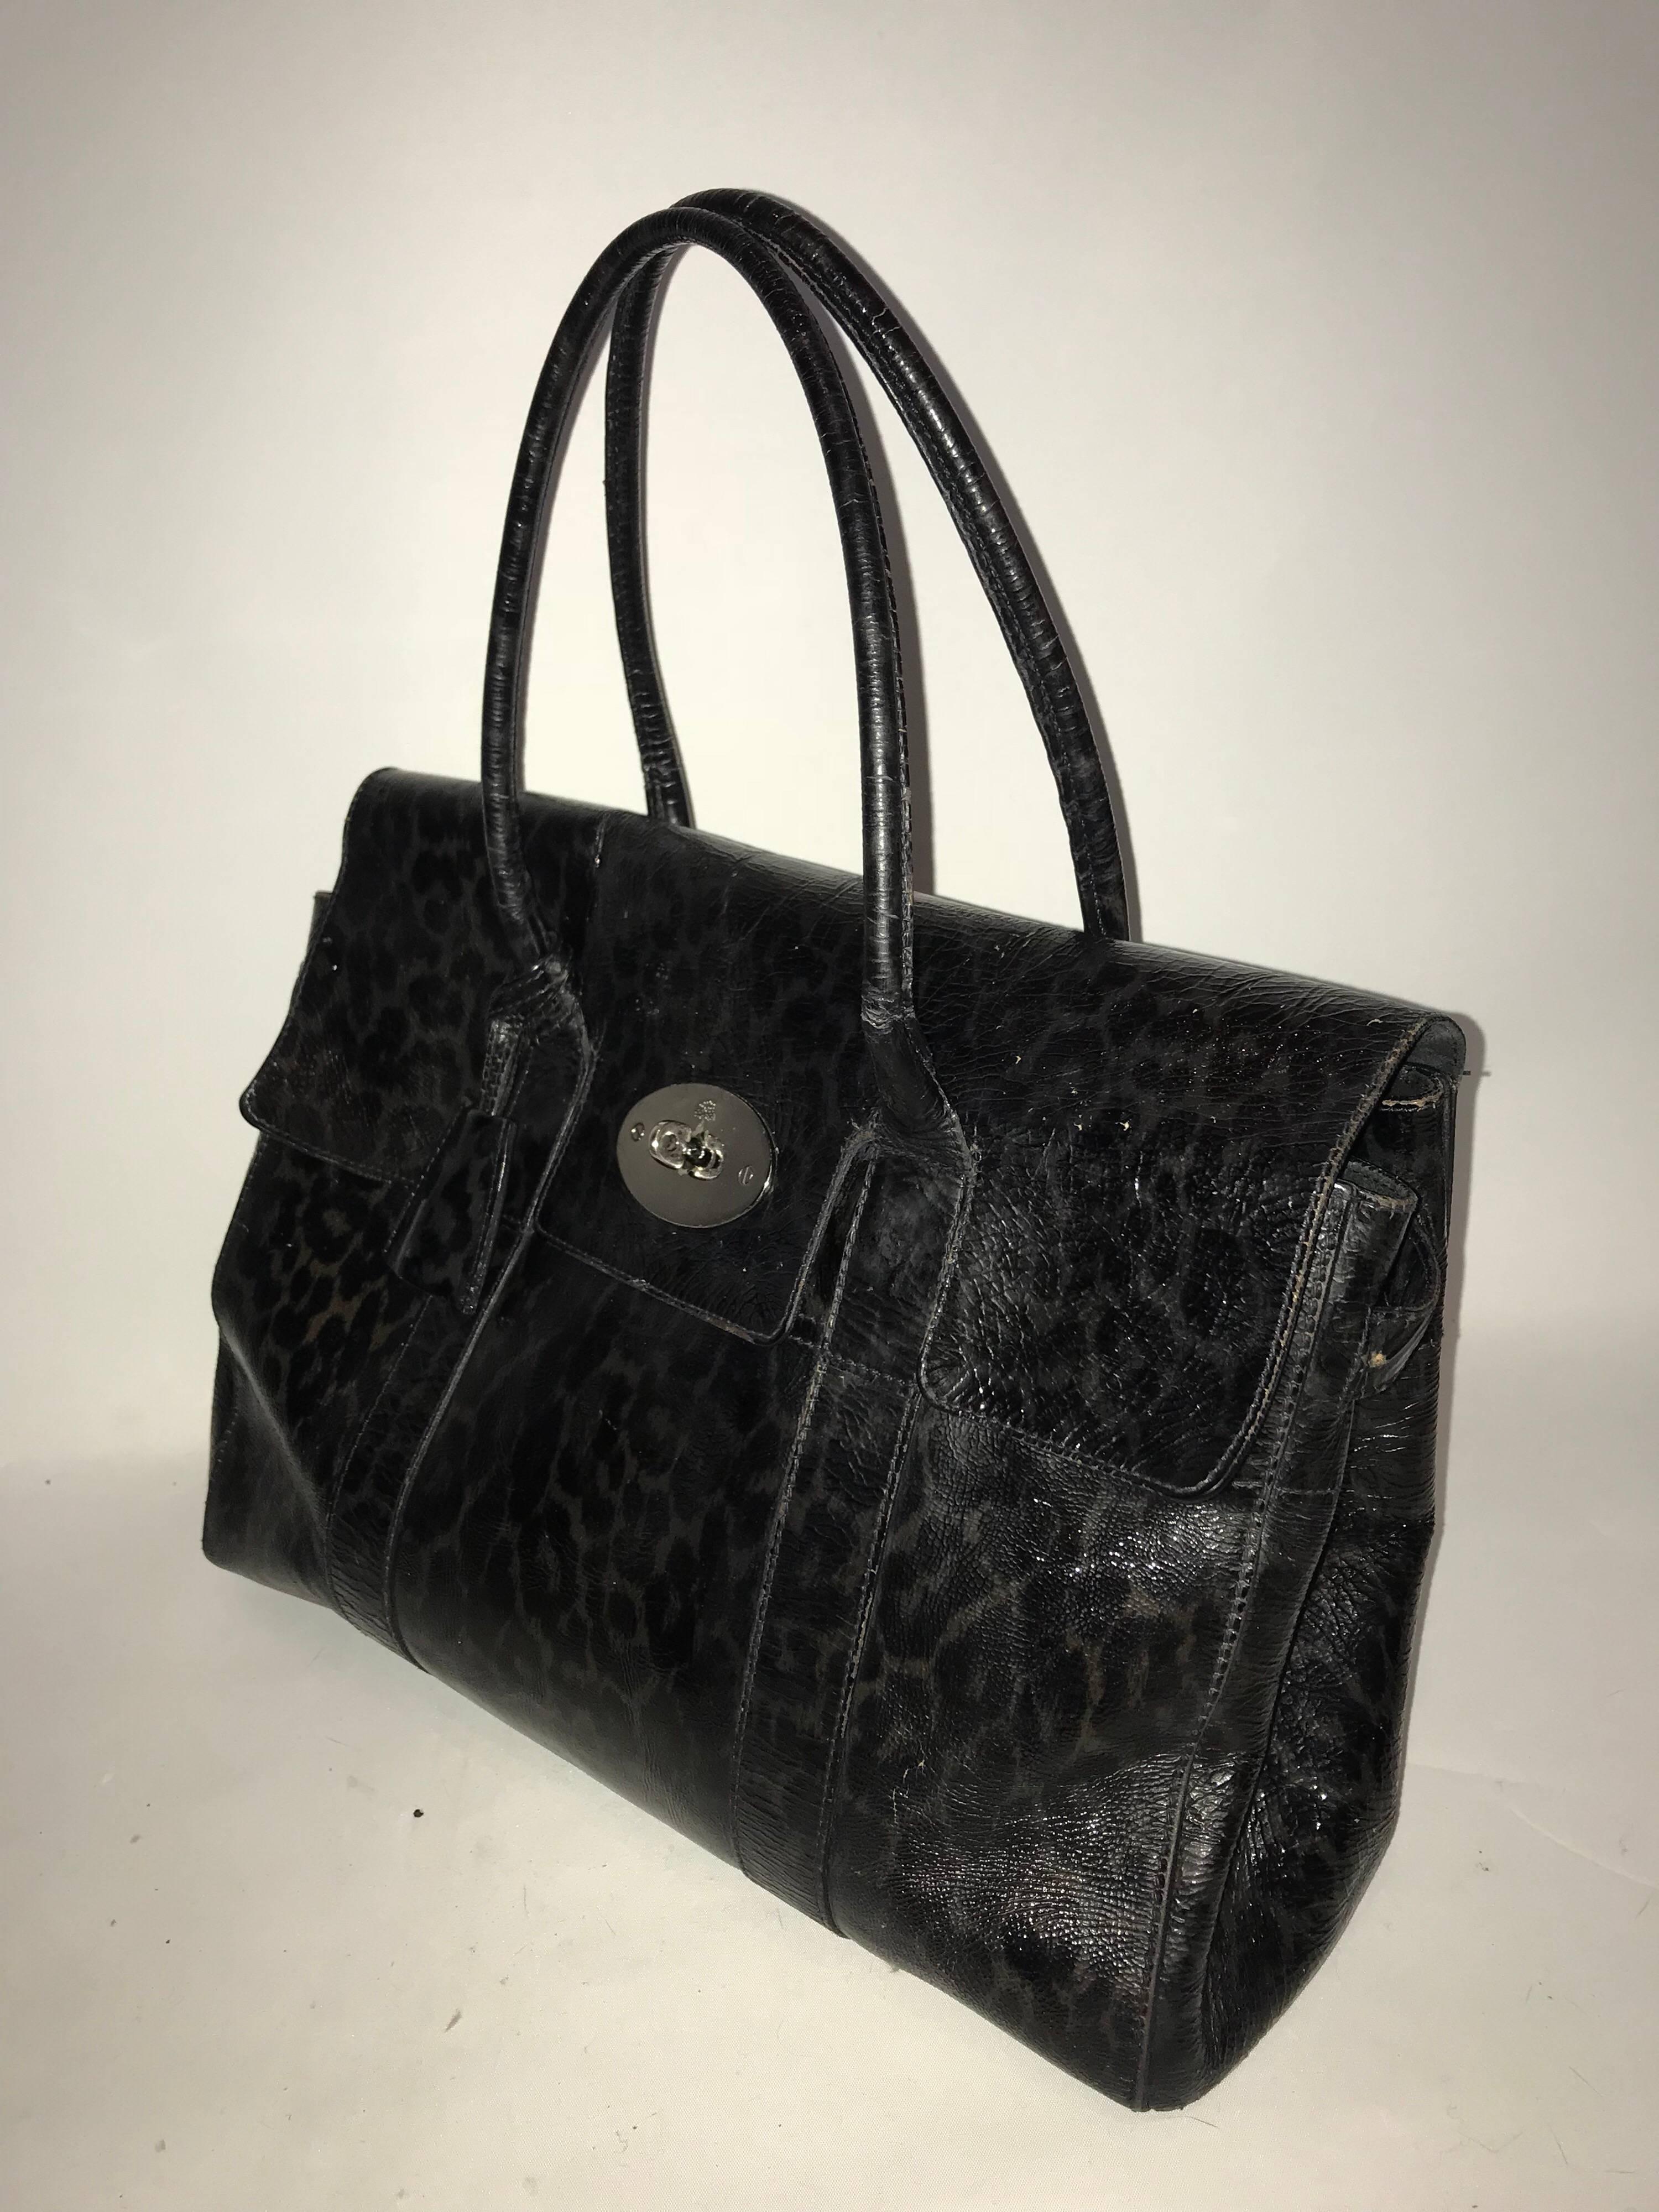 This authentic Mulberry Bayswater leopard print Satchel bag in a blue/black colour 

It showcases the brand's simple iconic design made for everyday use. Crafted from patent leather, this industrial-style tote features tall dual-rolled leather